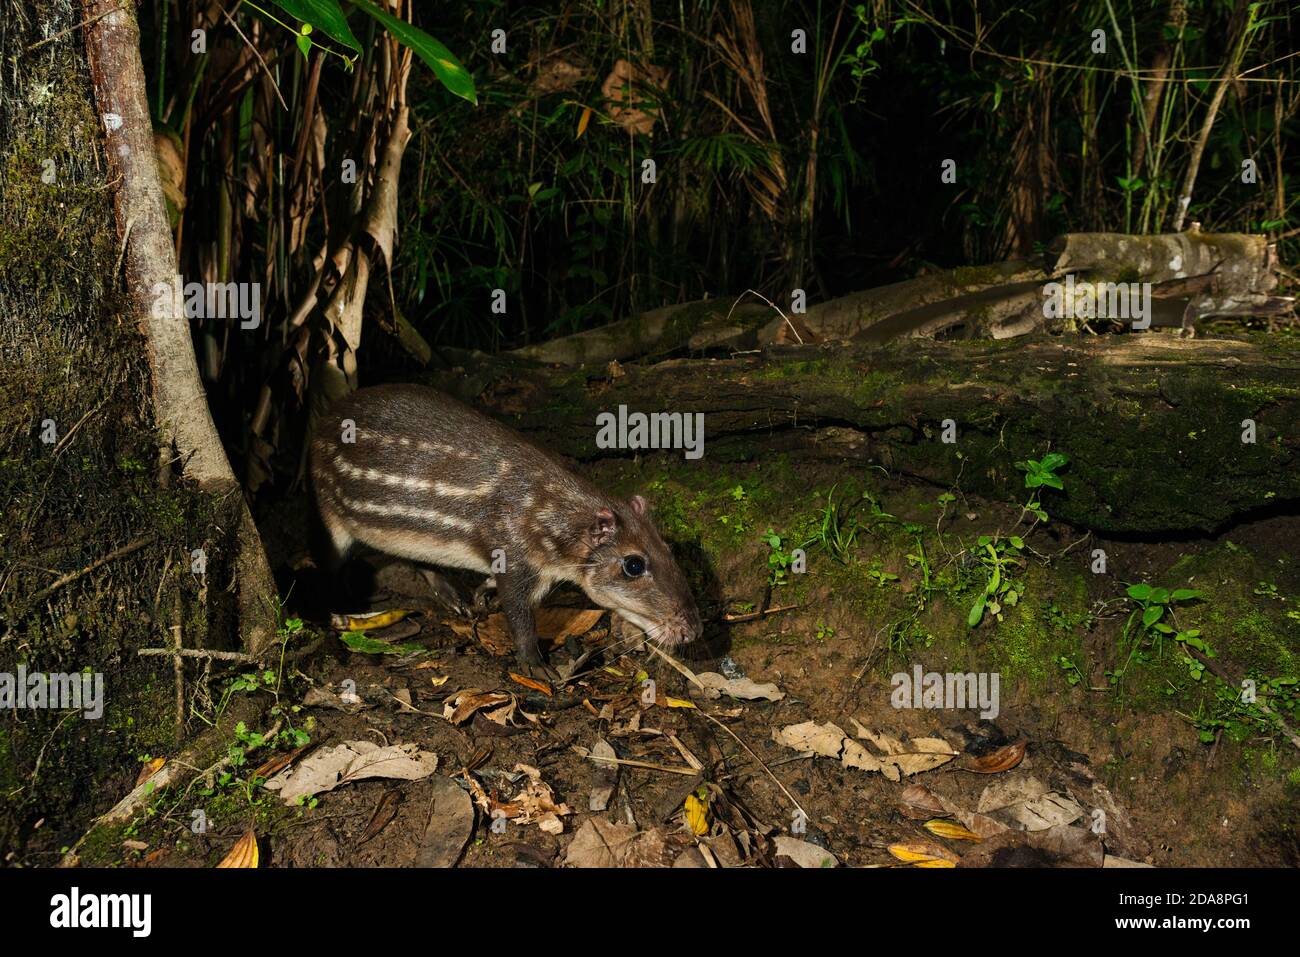 A Paca (Cuniculus paca) from the Atlantic Rainforest of SE Brazil Stock Photo